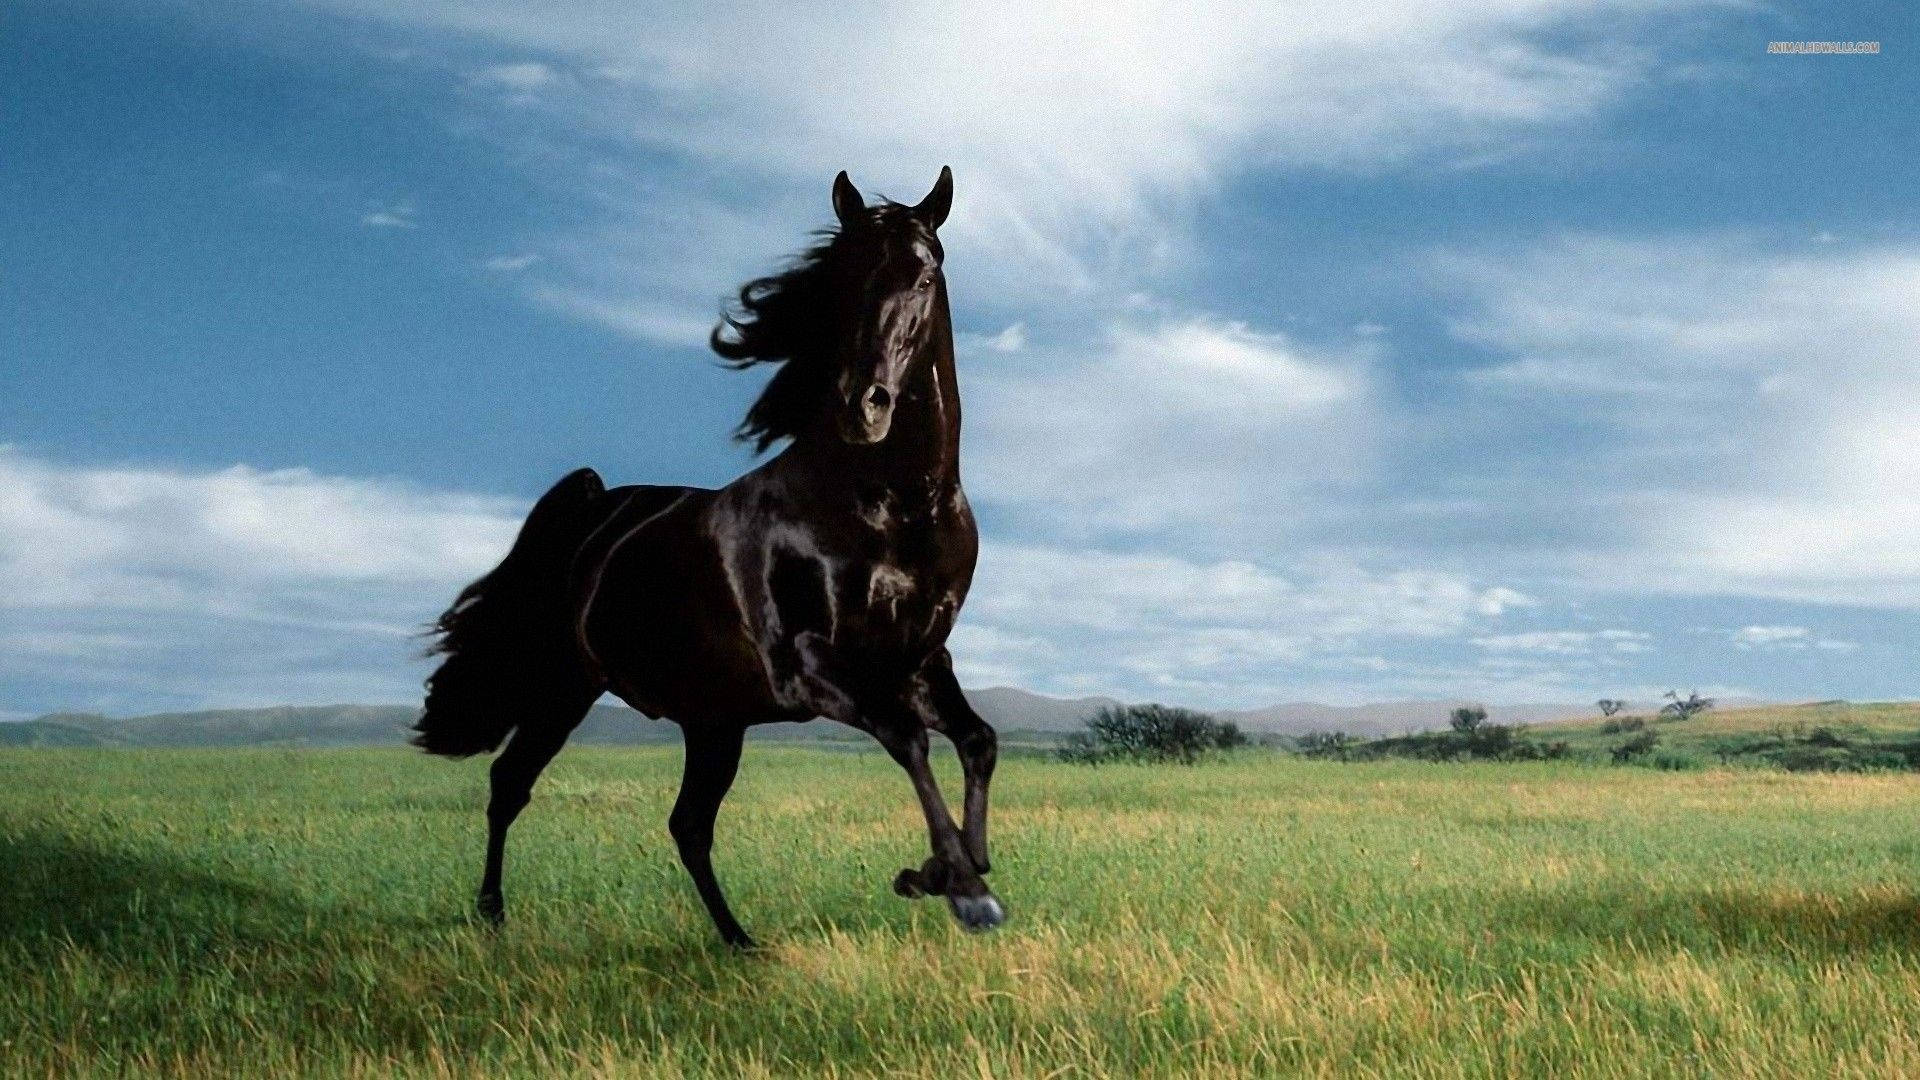 Black Horse In A Pasture Background